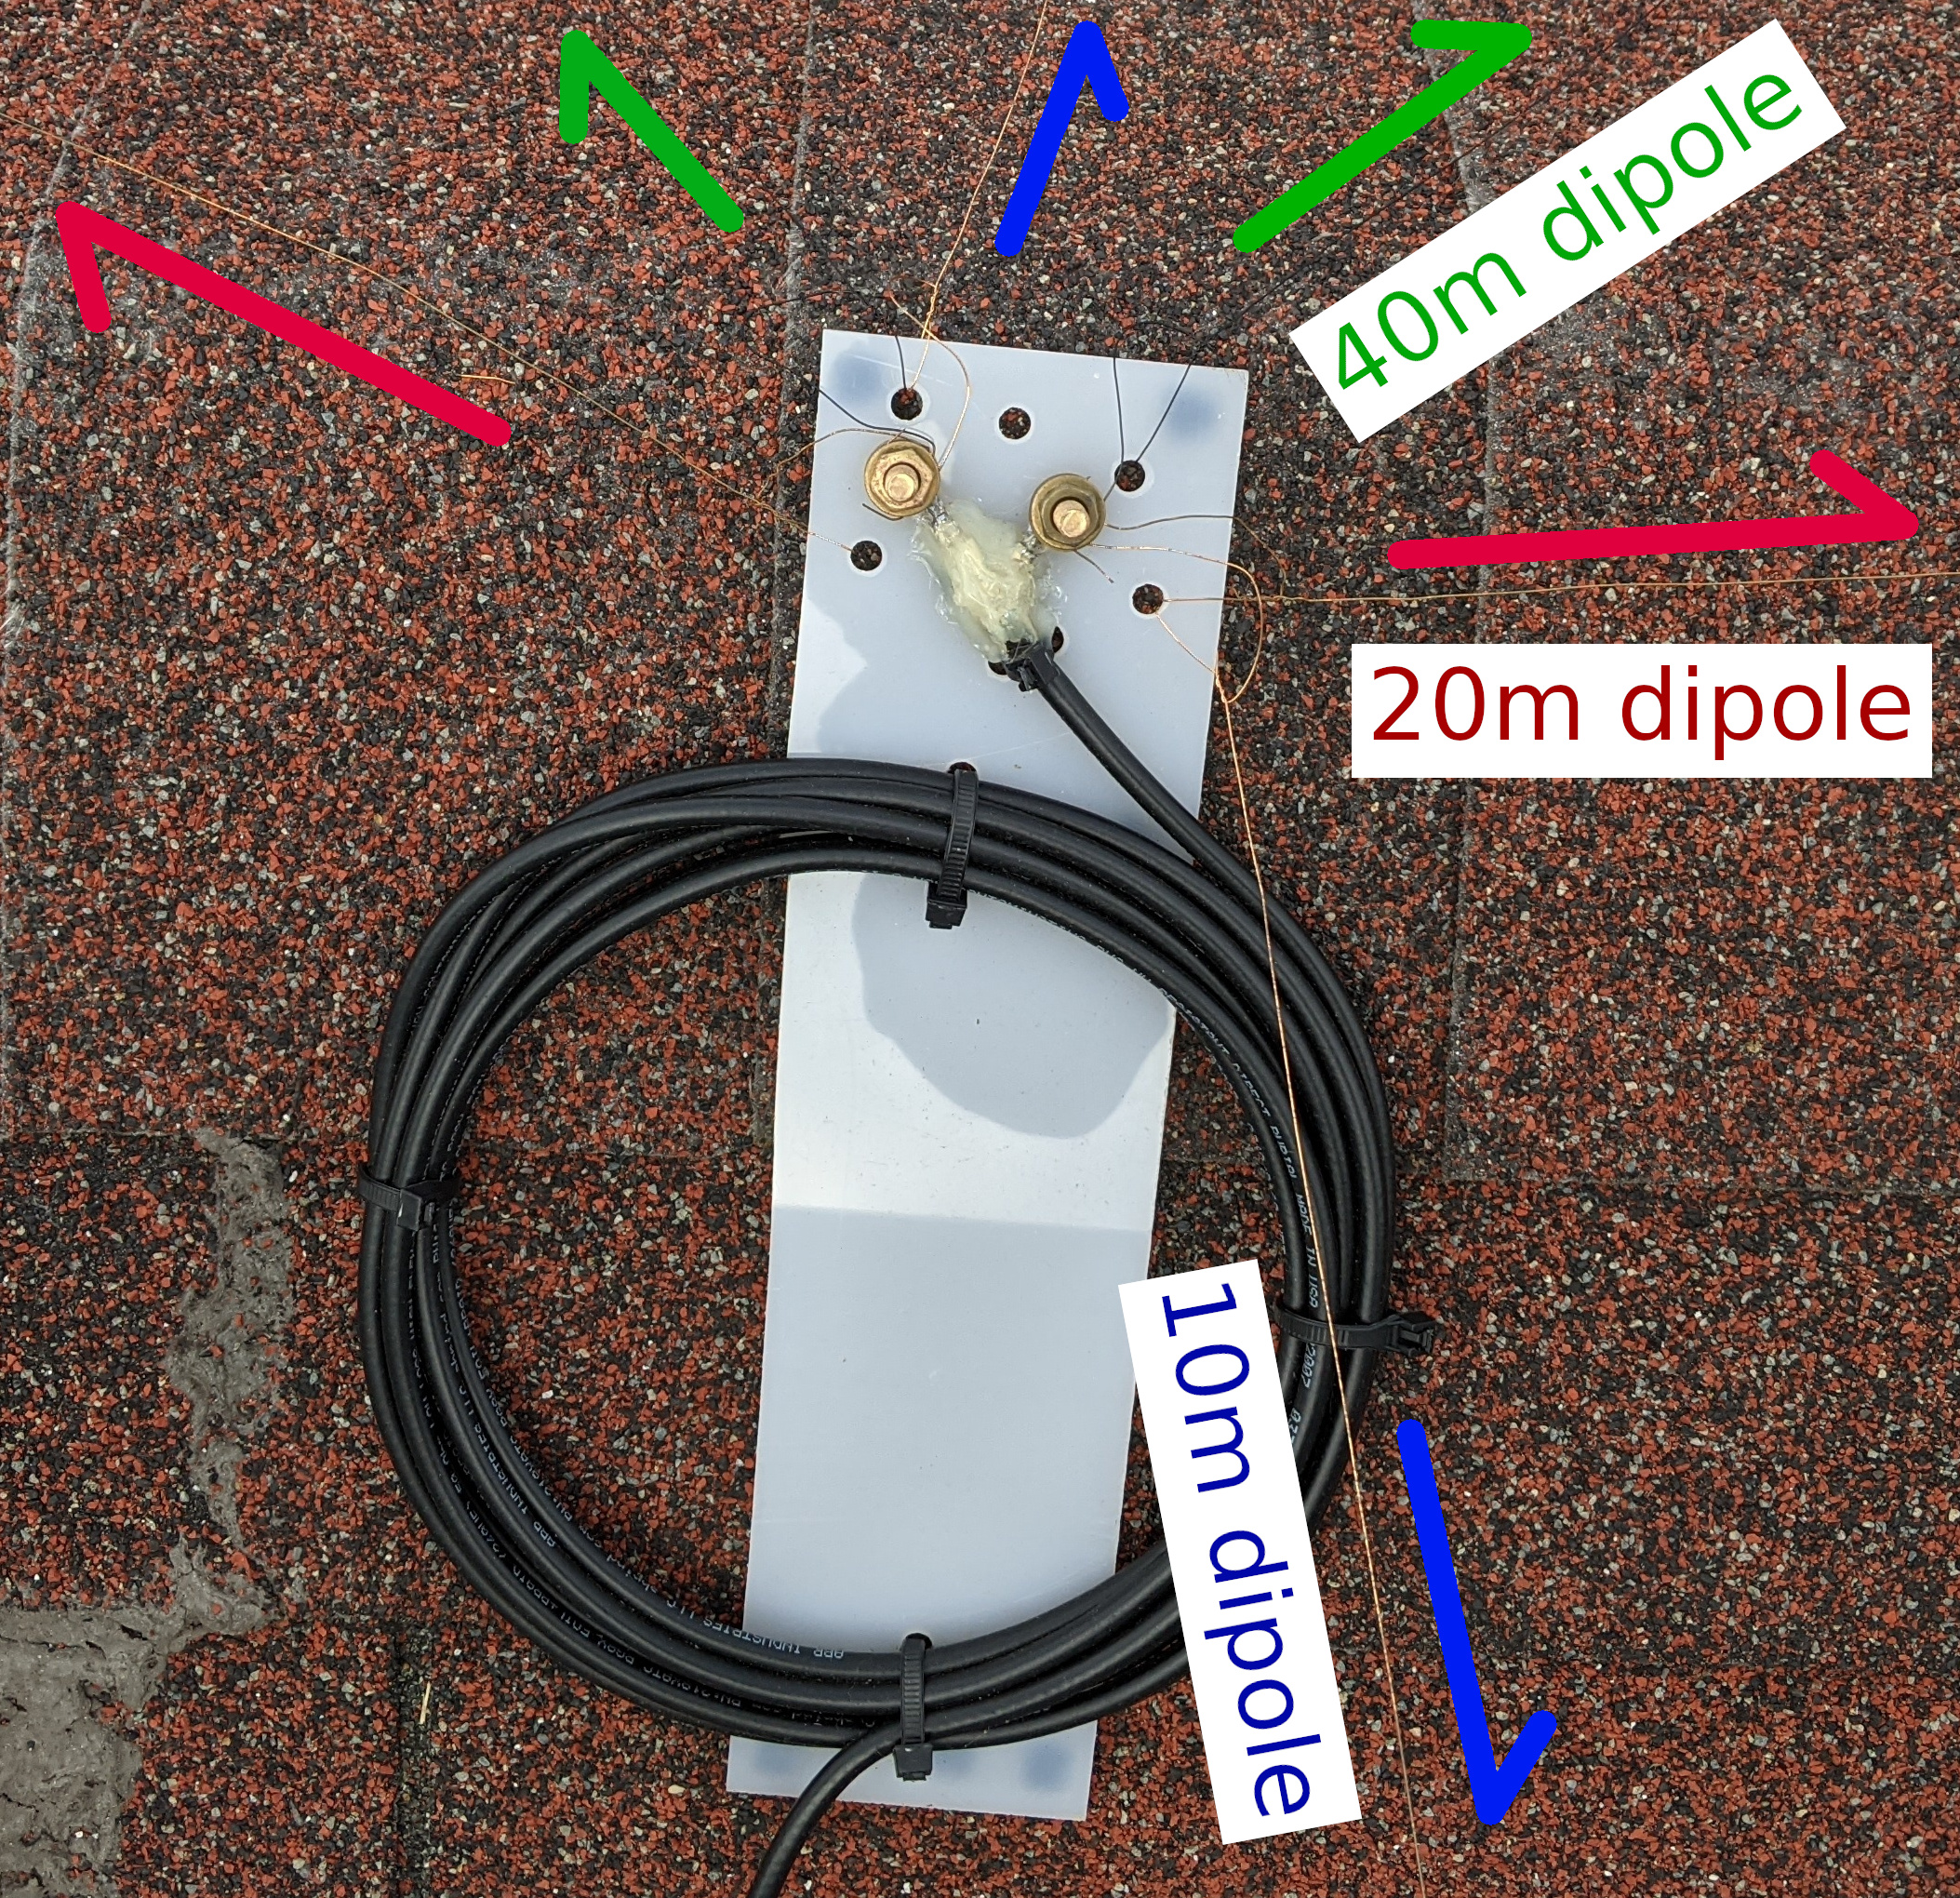 Building a Fan/Parallel Dipole Antenna